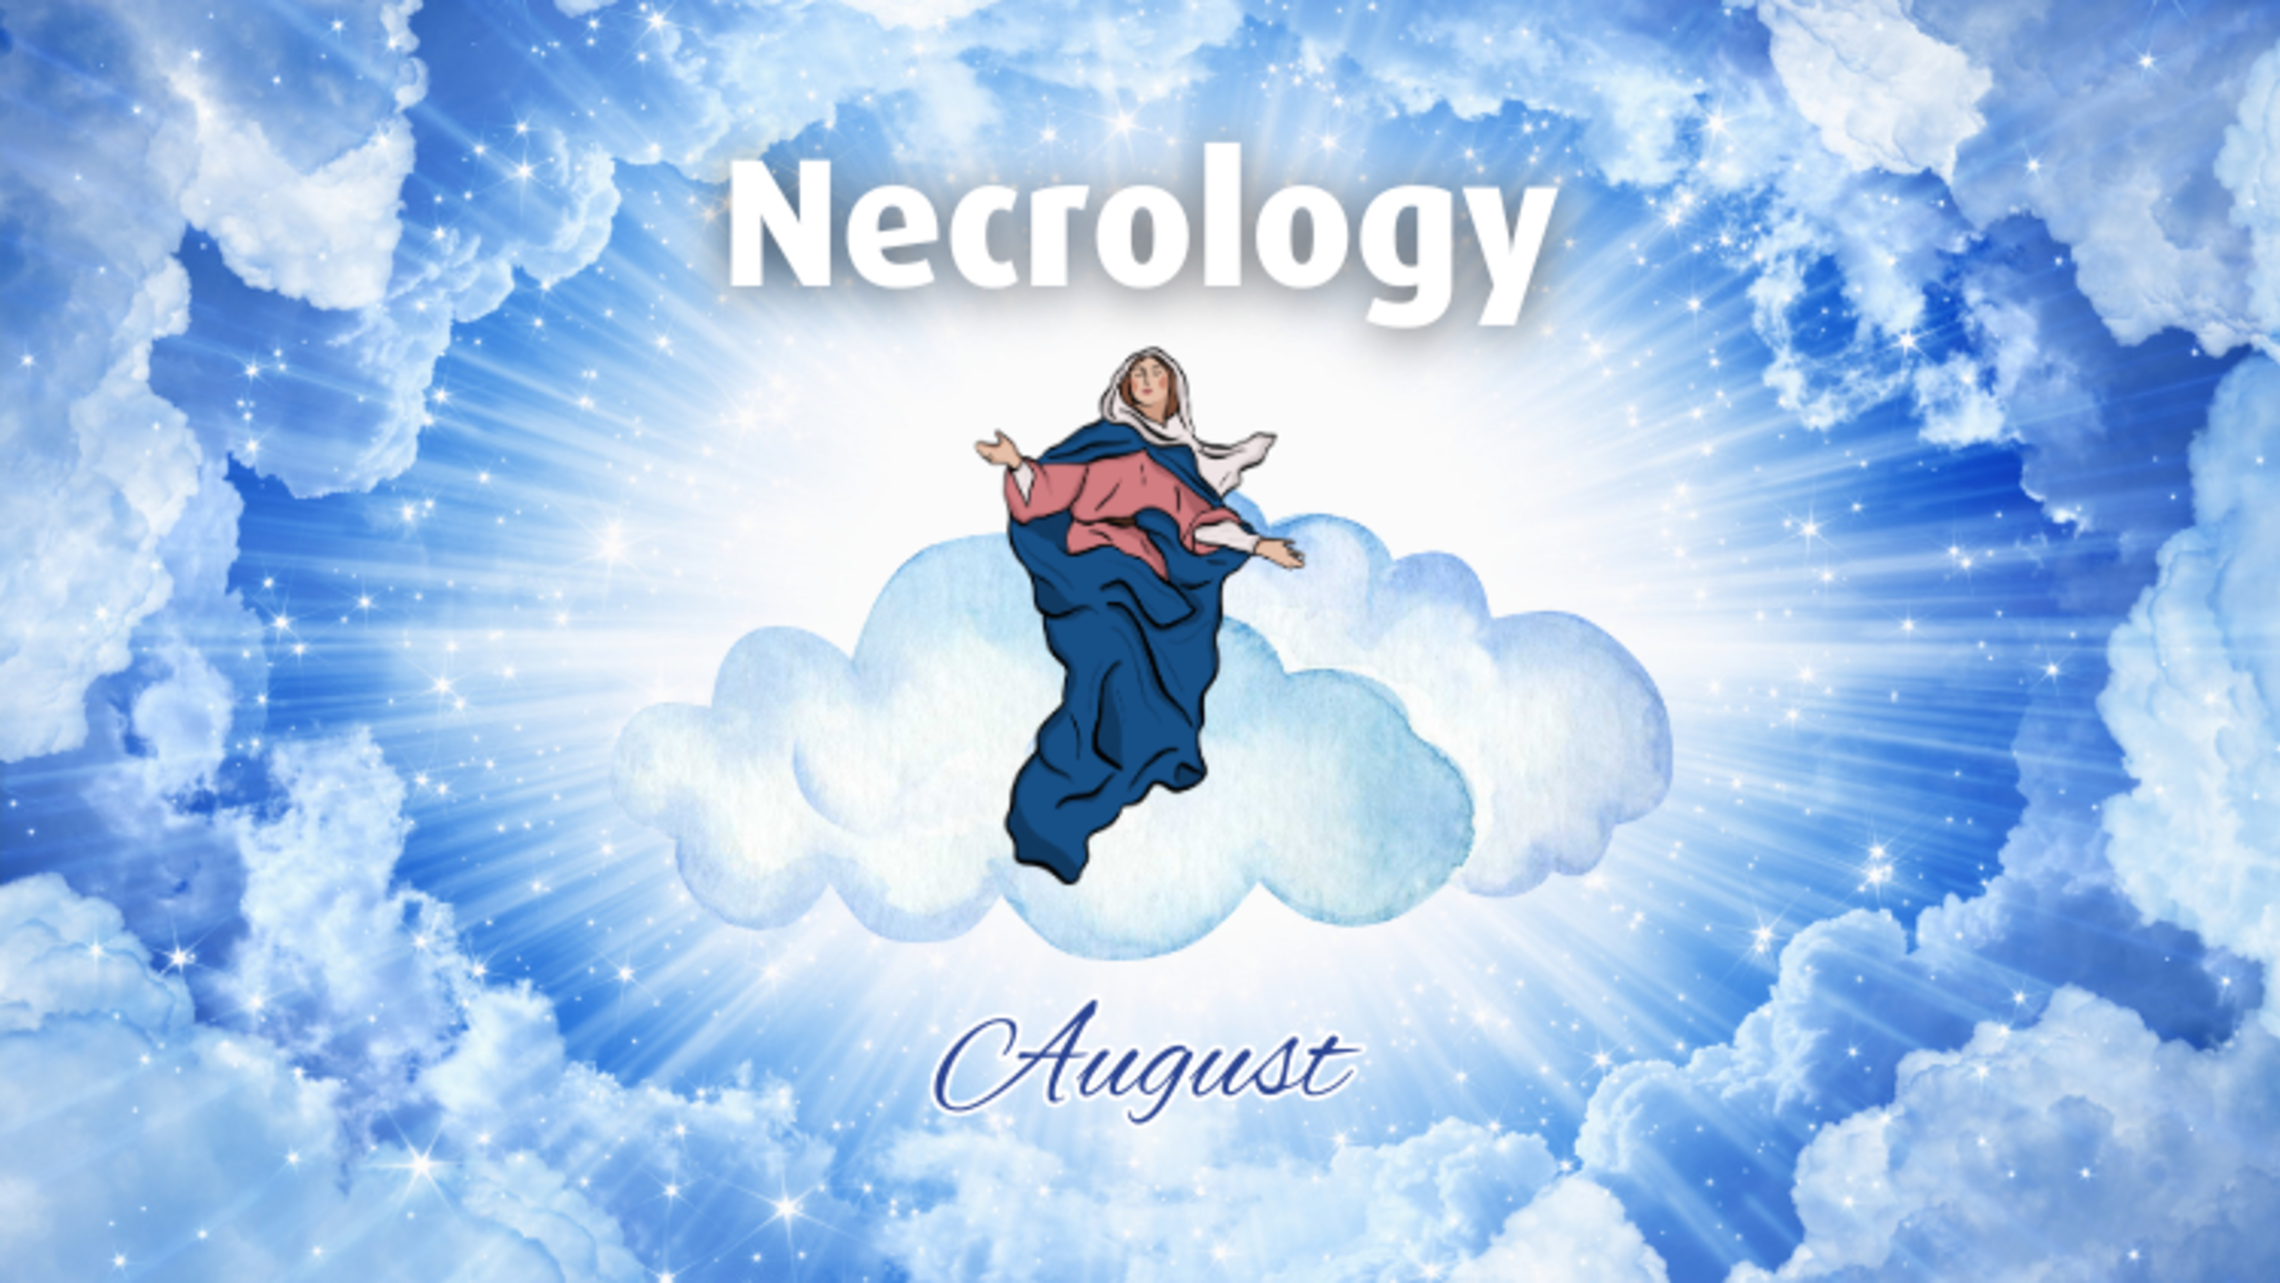 August Necrology